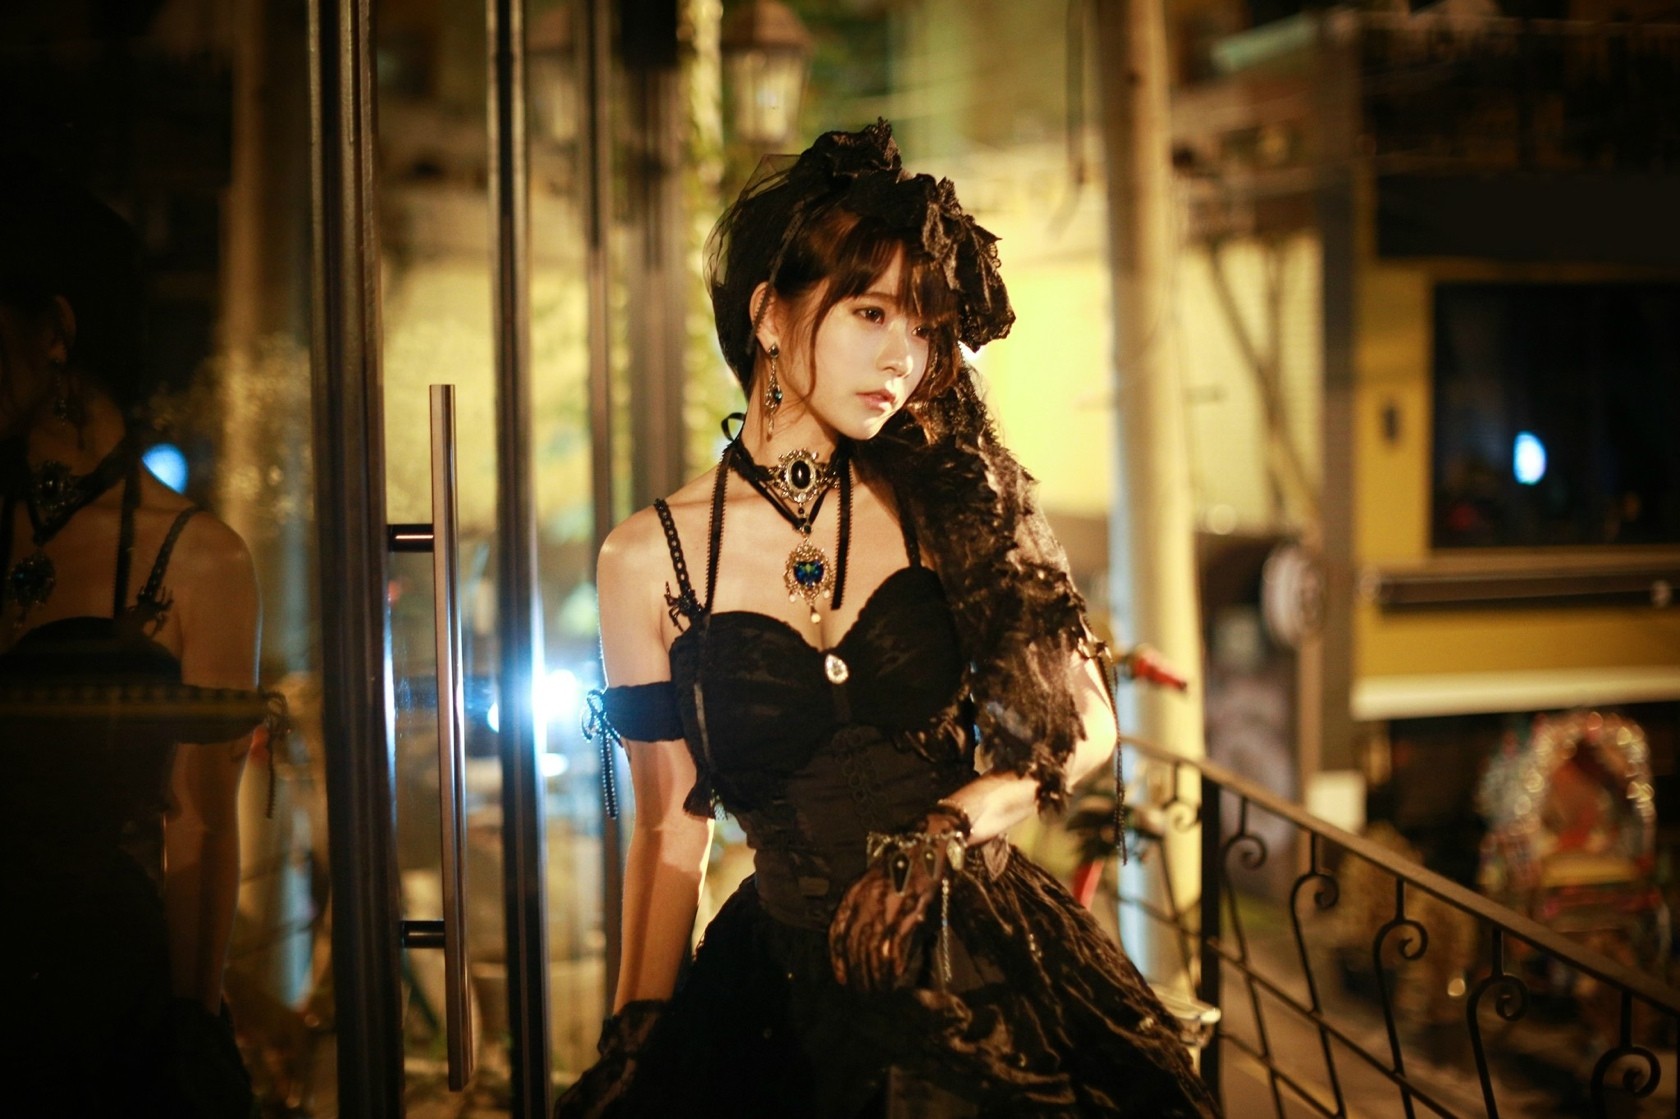 People 1680x1119 Yurisa Chan Korean model women Gothic Asian makeup standing dress black dress necklace gloves looking into the distance